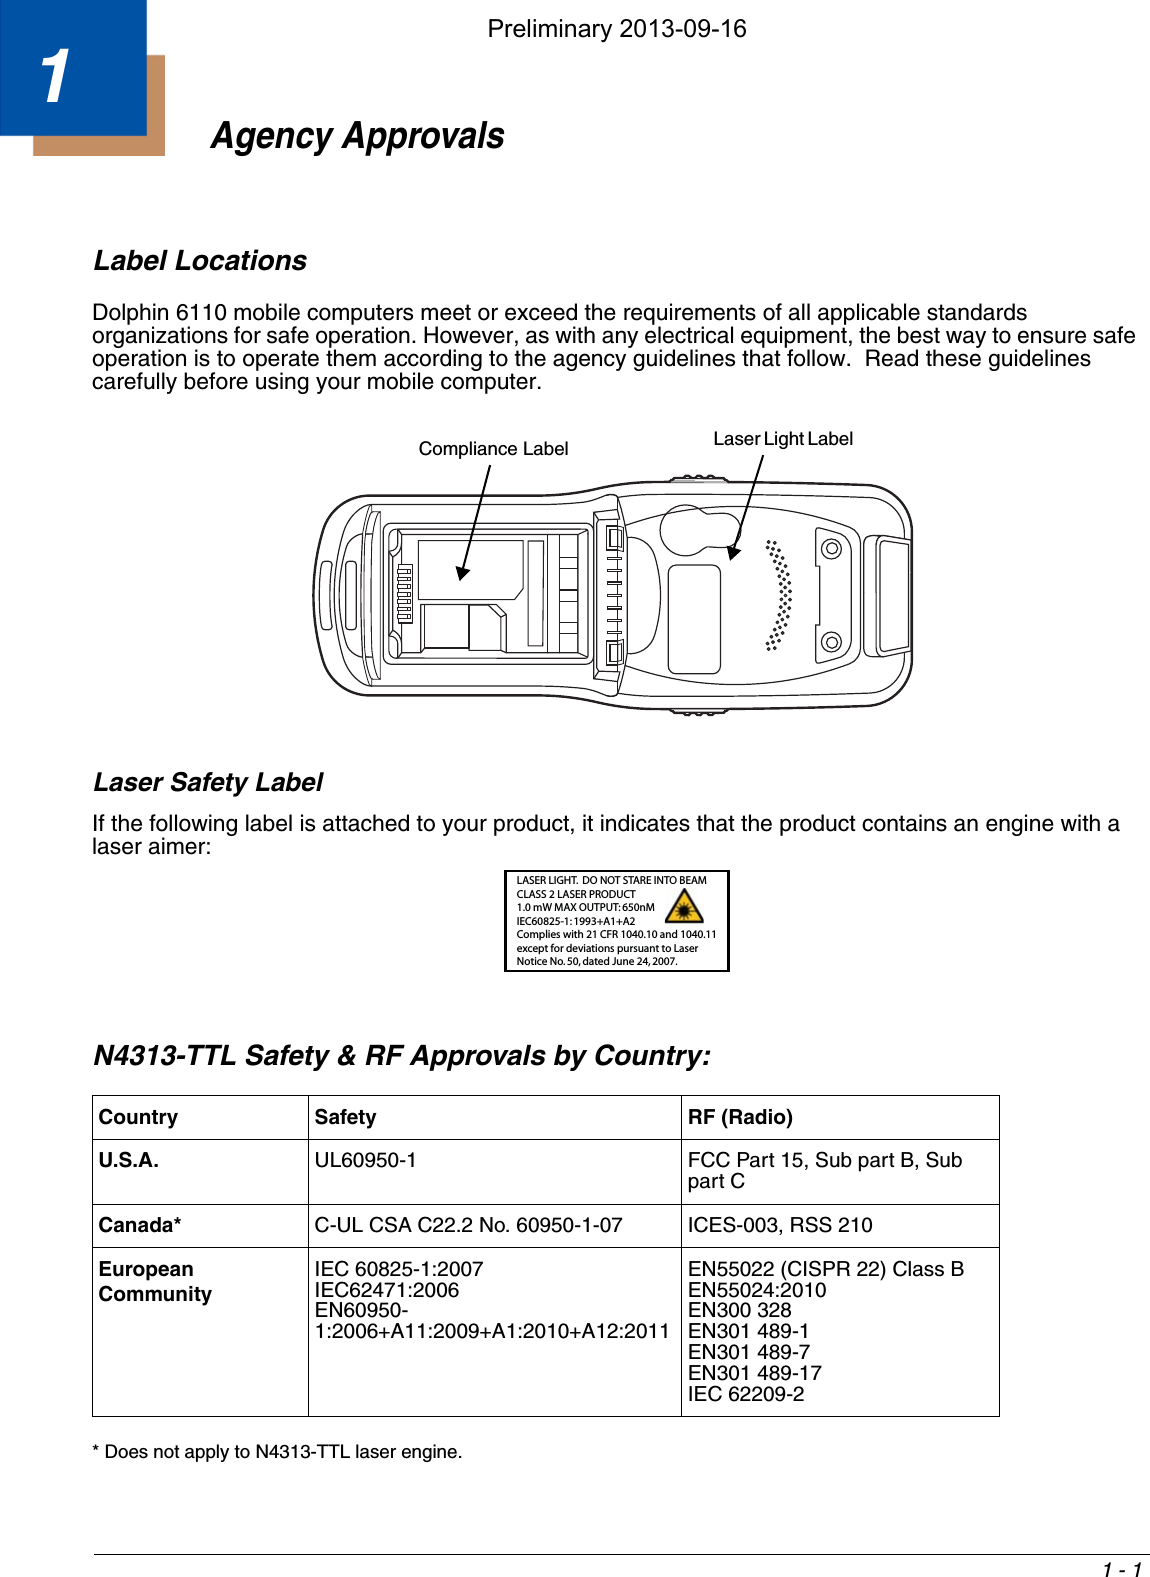 1 - 11Agency ApprovalsLabel Locations Dolphin 6110 mobile computers meet or exceed the requirements of all applicable standards organizations for safe operation. However, as with any electrical equipment, the best way to ensure safe operation is to operate them according to the agency guidelines that follow.  Read these guidelines carefully before using your mobile computer. Laser Safety Label If the following label is attached to your product, it indicates that the product contains an engine with a laser aimer:N4313-TTL Safety &amp; RF Approvals by Country: * Does not apply to N4313-TTL laser engine.Country Safety RF (Radio)U.S.A. UL60950-1  FCC Part 15, Sub part B, Sub part CCanada* C-UL CSA C22.2 No. 60950-1-07 ICES-003, RSS 210European CommunityIEC 60825-1:2007IEC62471:2006EN60950-1:2006+A11:2009+A1:2010+A12:2011EN55022 (CISPR 22) Class BEN55024:2010EN300 328EN301 489-1EN301 489-7EN301 489-17IEC 62209-2Compliance Label Laser Light Label LASER LIGHT.  DO NOT STARE INTO BEAMCLASS 2 LASER PRODUCT1.0 mW MAX OUTPUT: 650nMIEC60825-1: 1993+A1+A2Complies with 21 CFR 1040.10 and 1040.11except for deviations pursuant to LaserNotice No. 50, dated June 24, 2007.Preliminary 2013-09-16